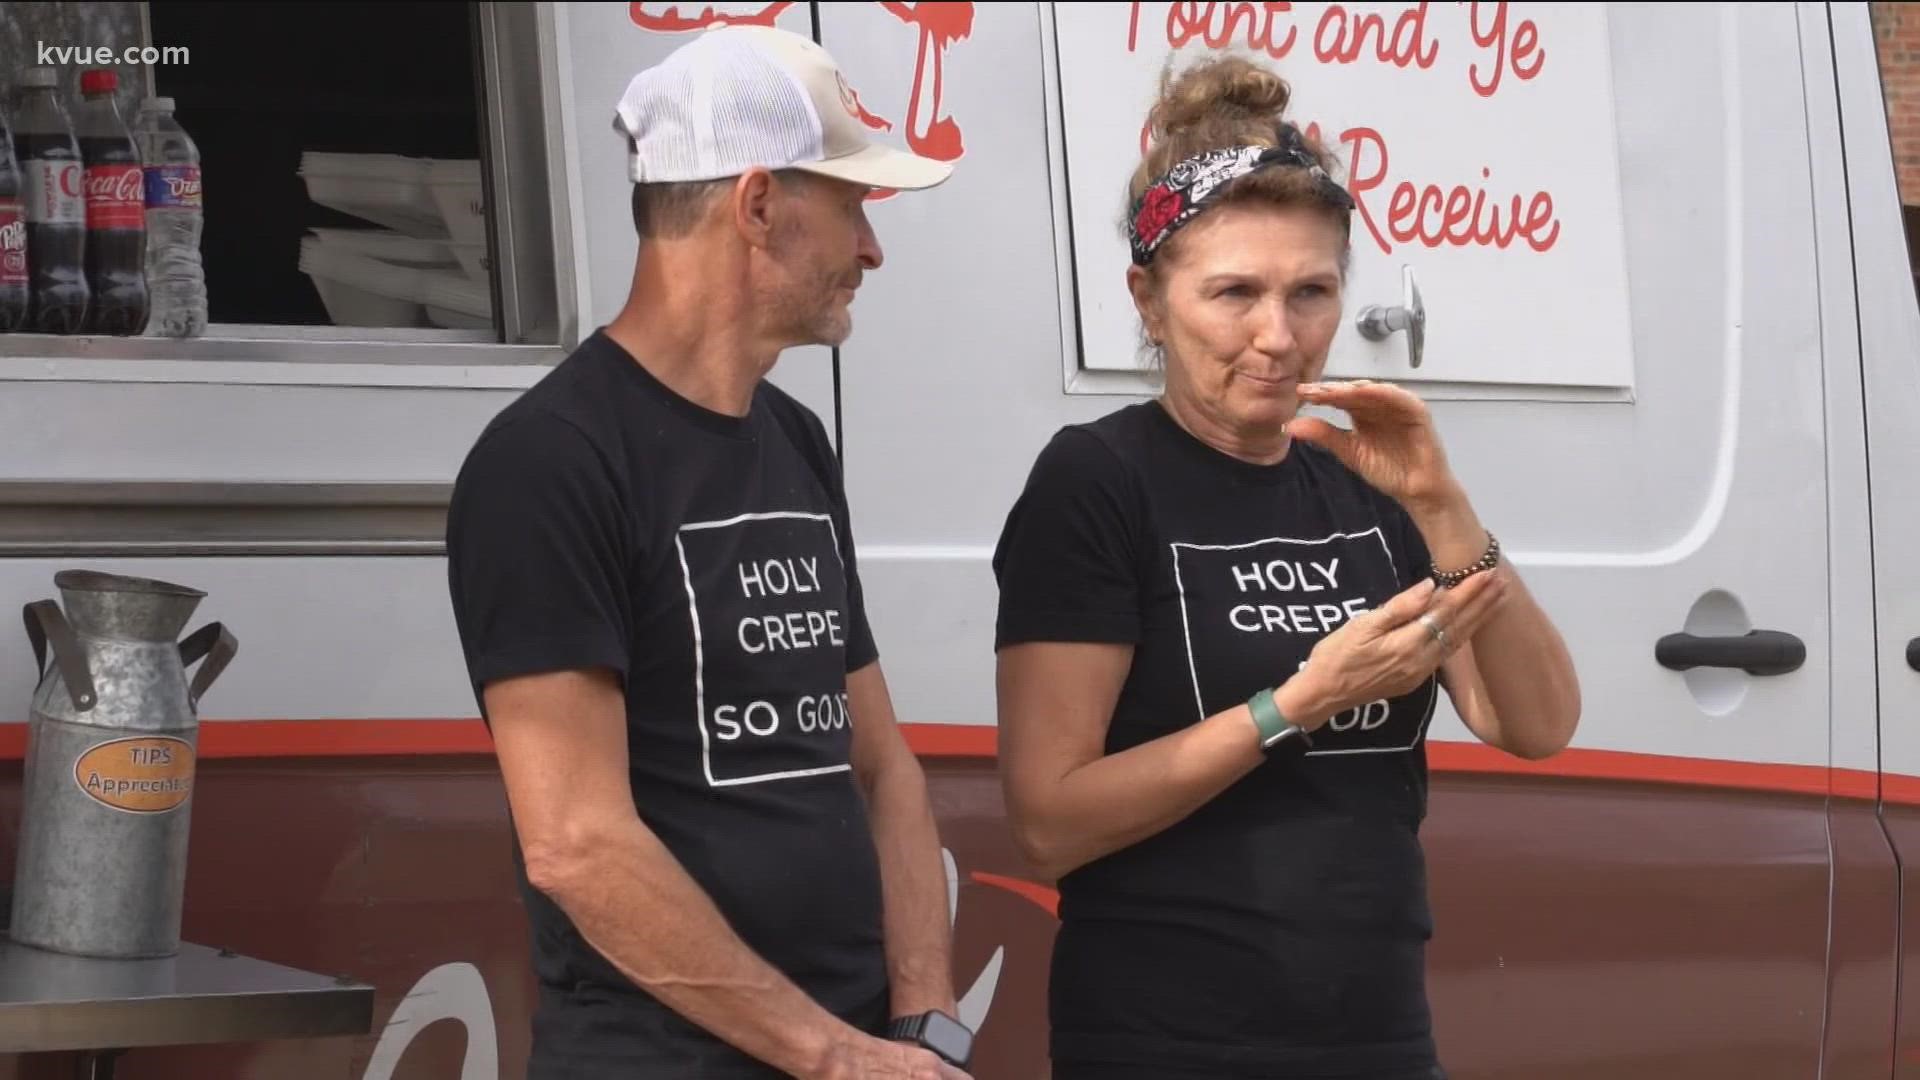 Ukrainian and Russian natives operate food truck in Central Texas to show how cuisine can bring people closer.